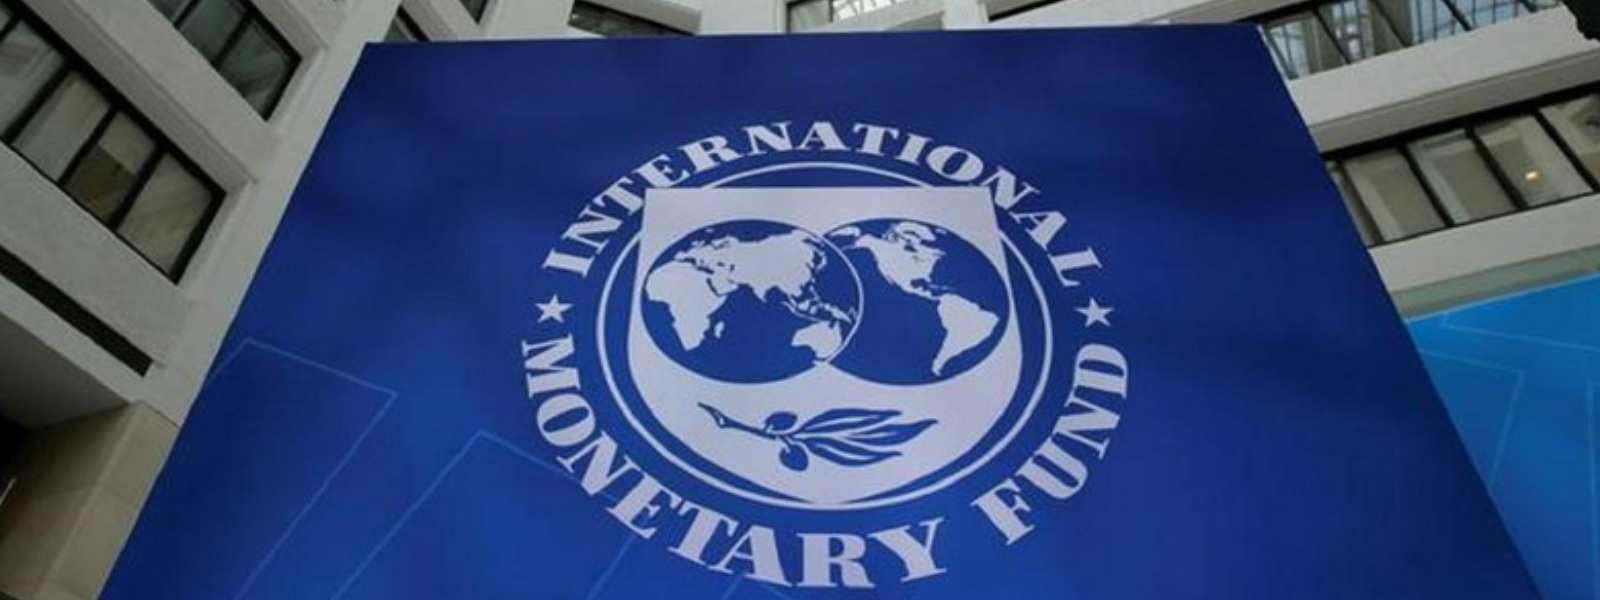 SL should curtail pressure by SOE's to Economy-IMF